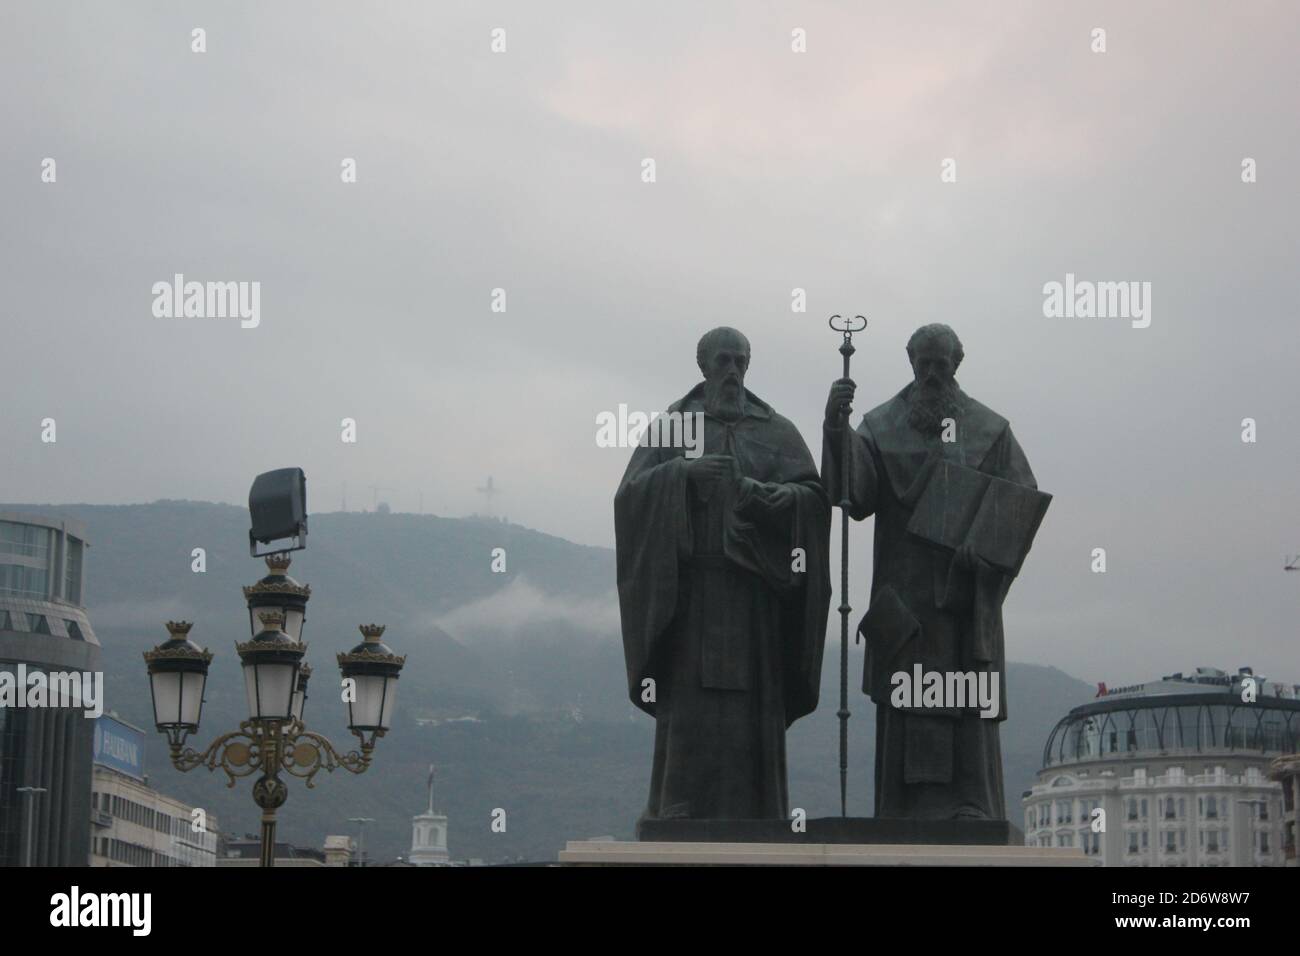 Monument of Saints Cyril and Methodius in Skopje city in North Macedonia Stock Photo